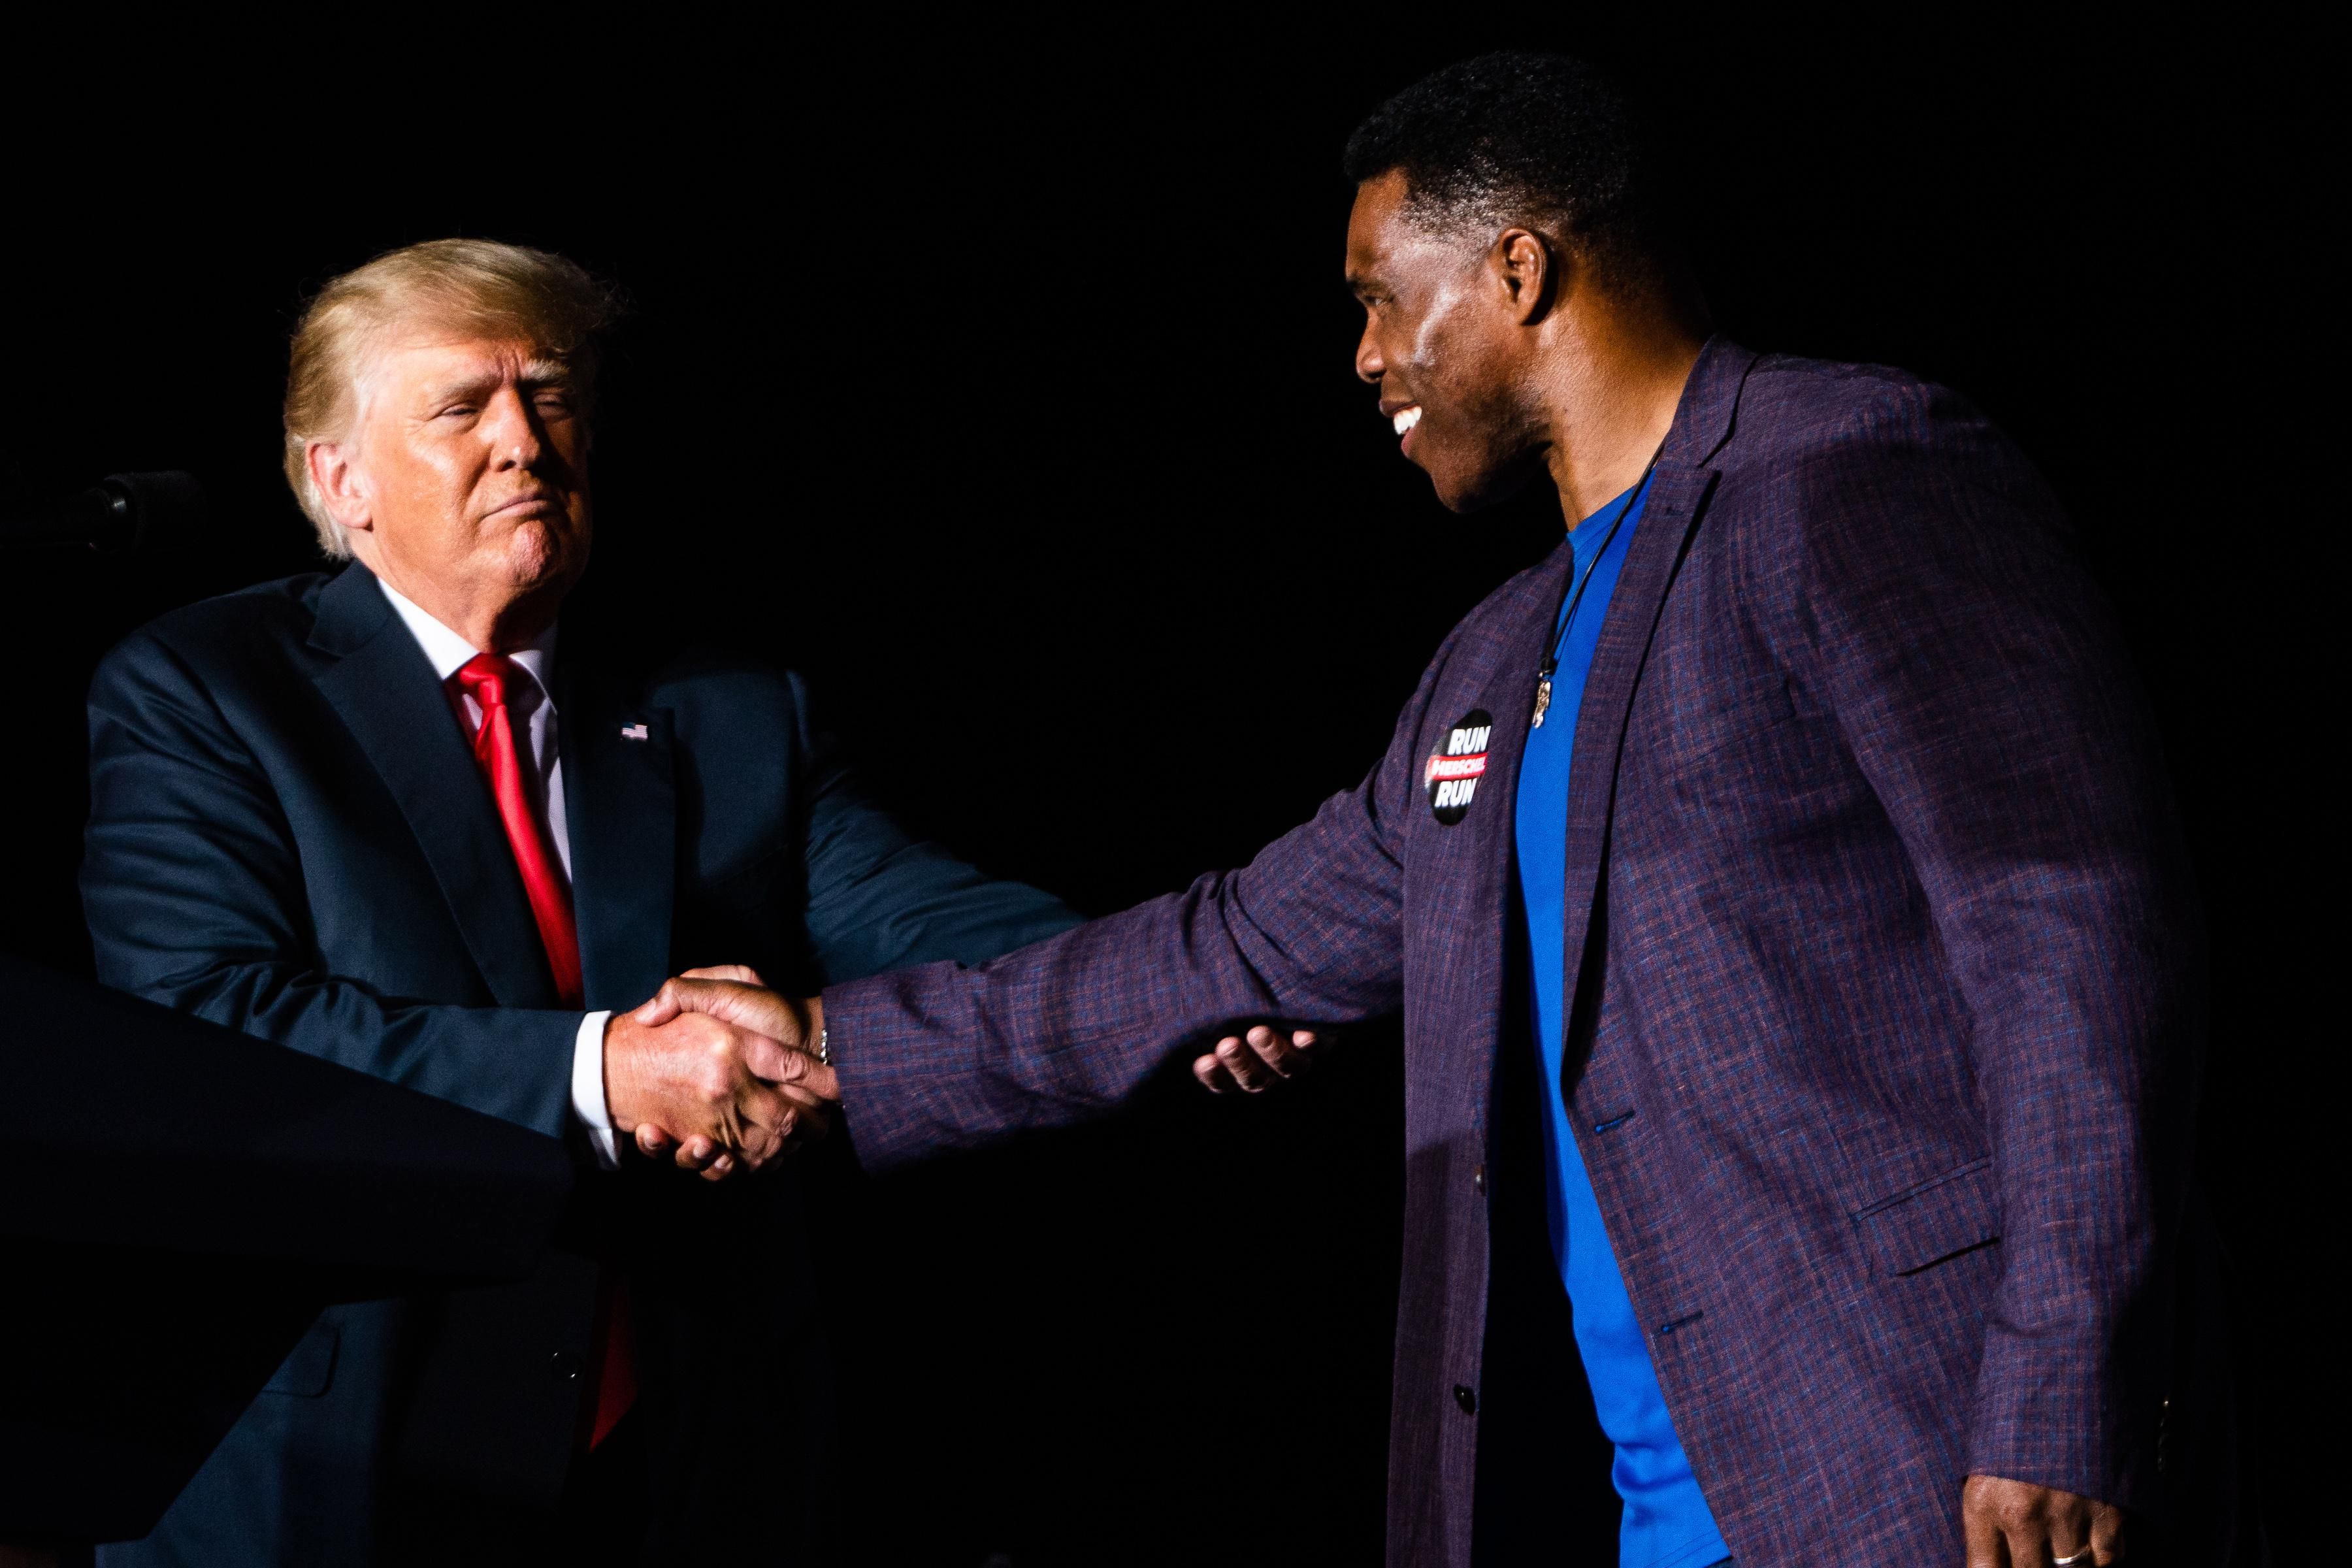 Former U.S. President Donald Trump shakes hands with Republican Senate candidate Herschel Walker at a rally in Perry, Georgia on September 25, 2021.